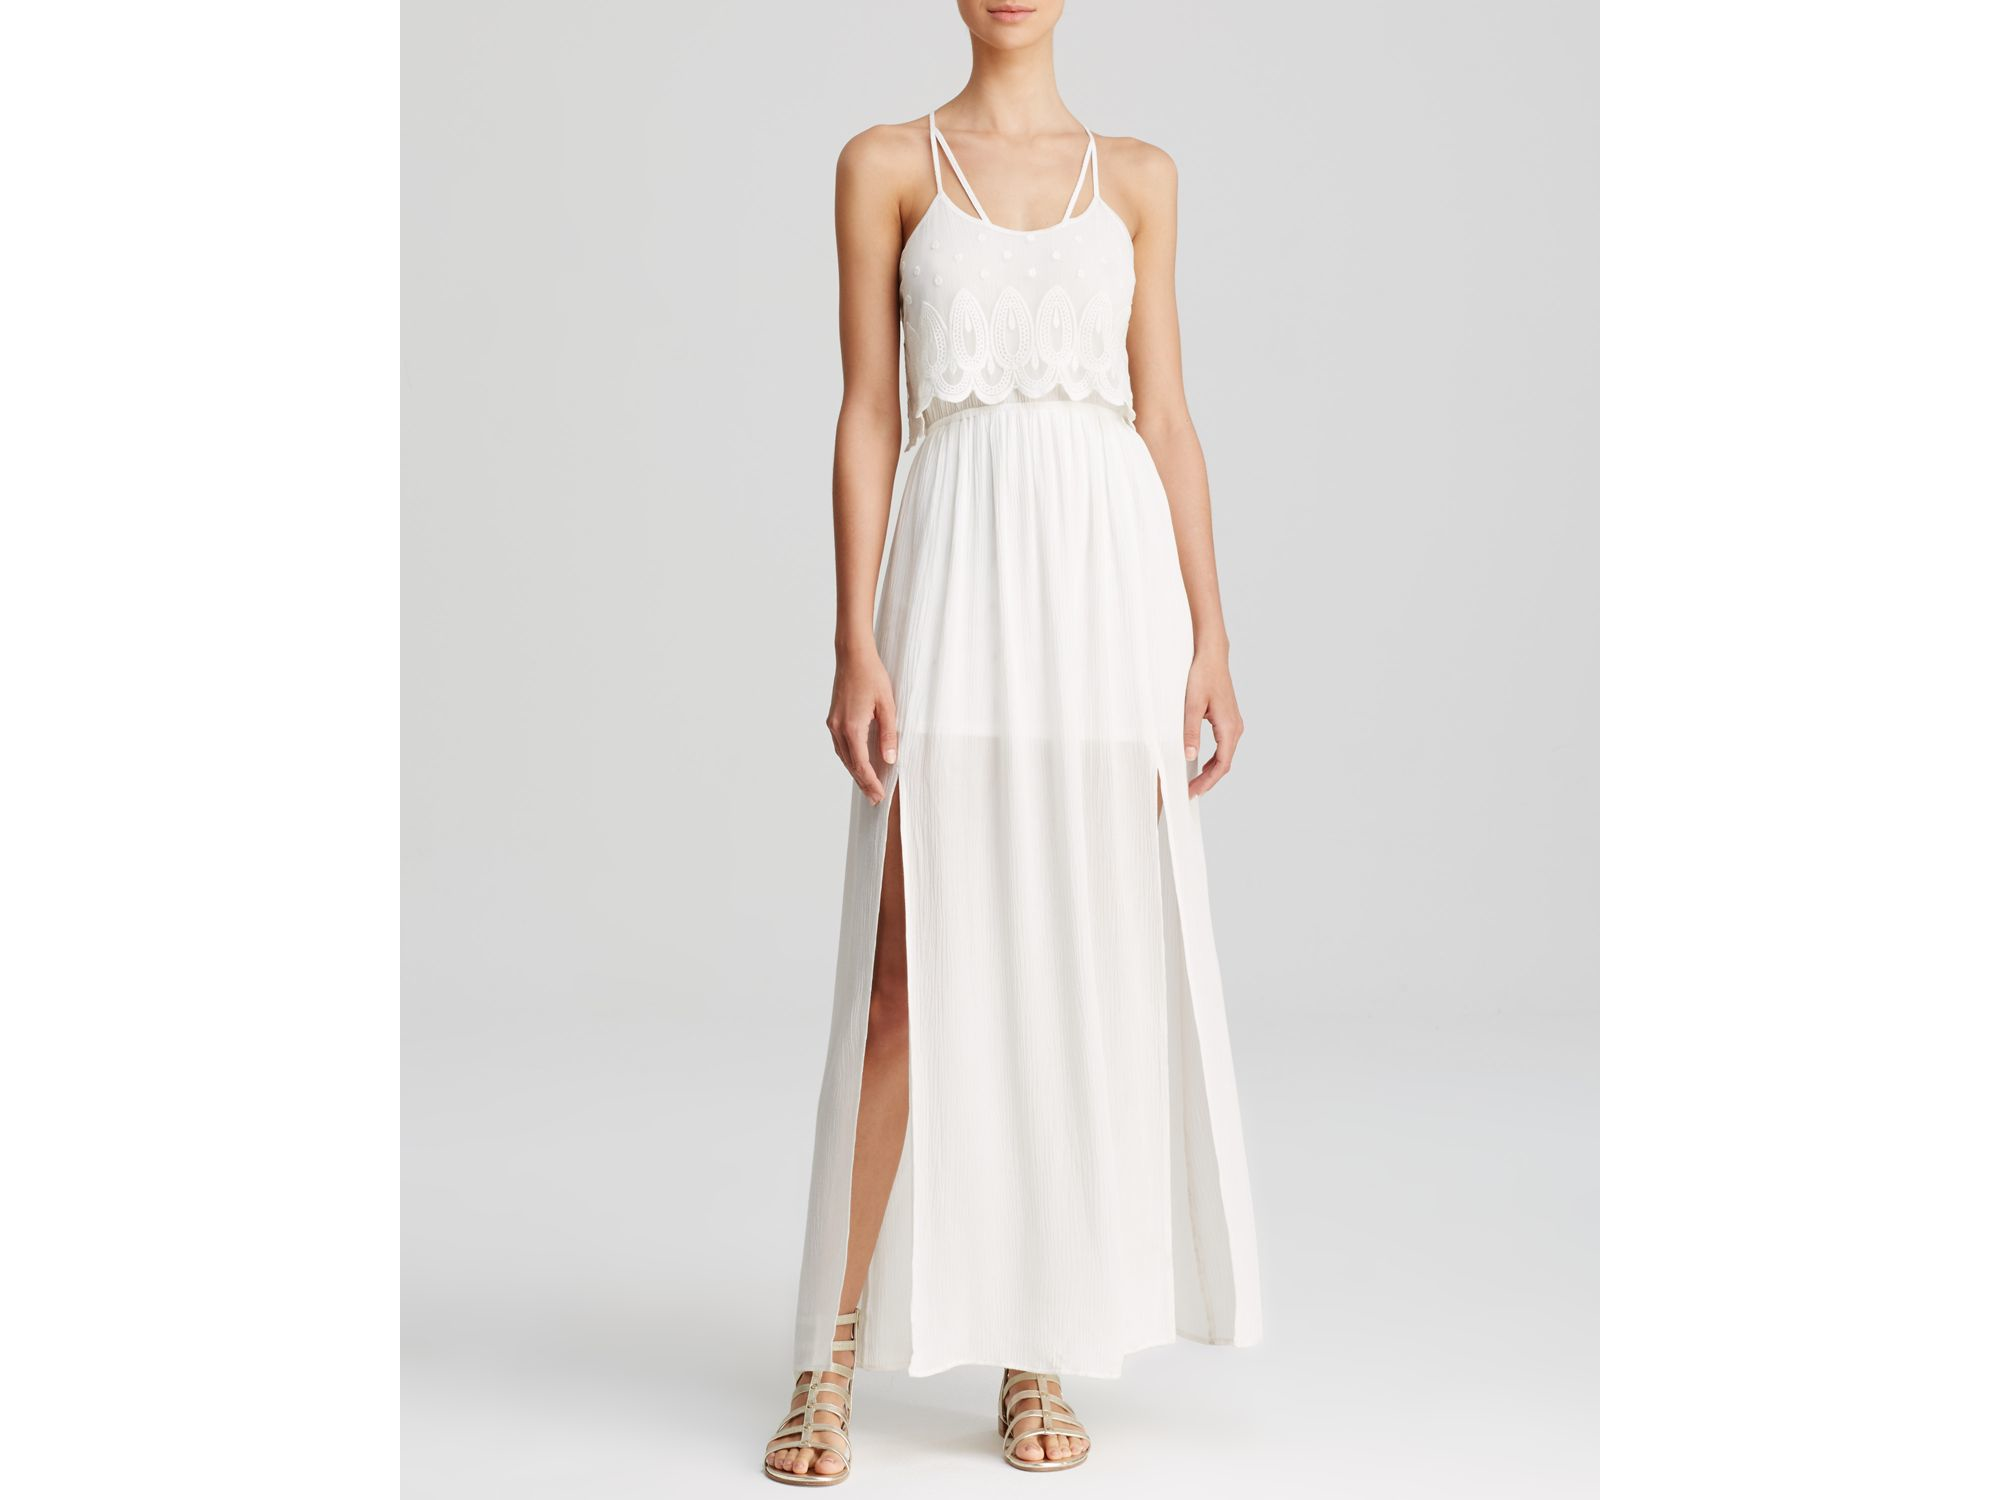 Lyst - Mystic Dress - Maxi Lace Back in White